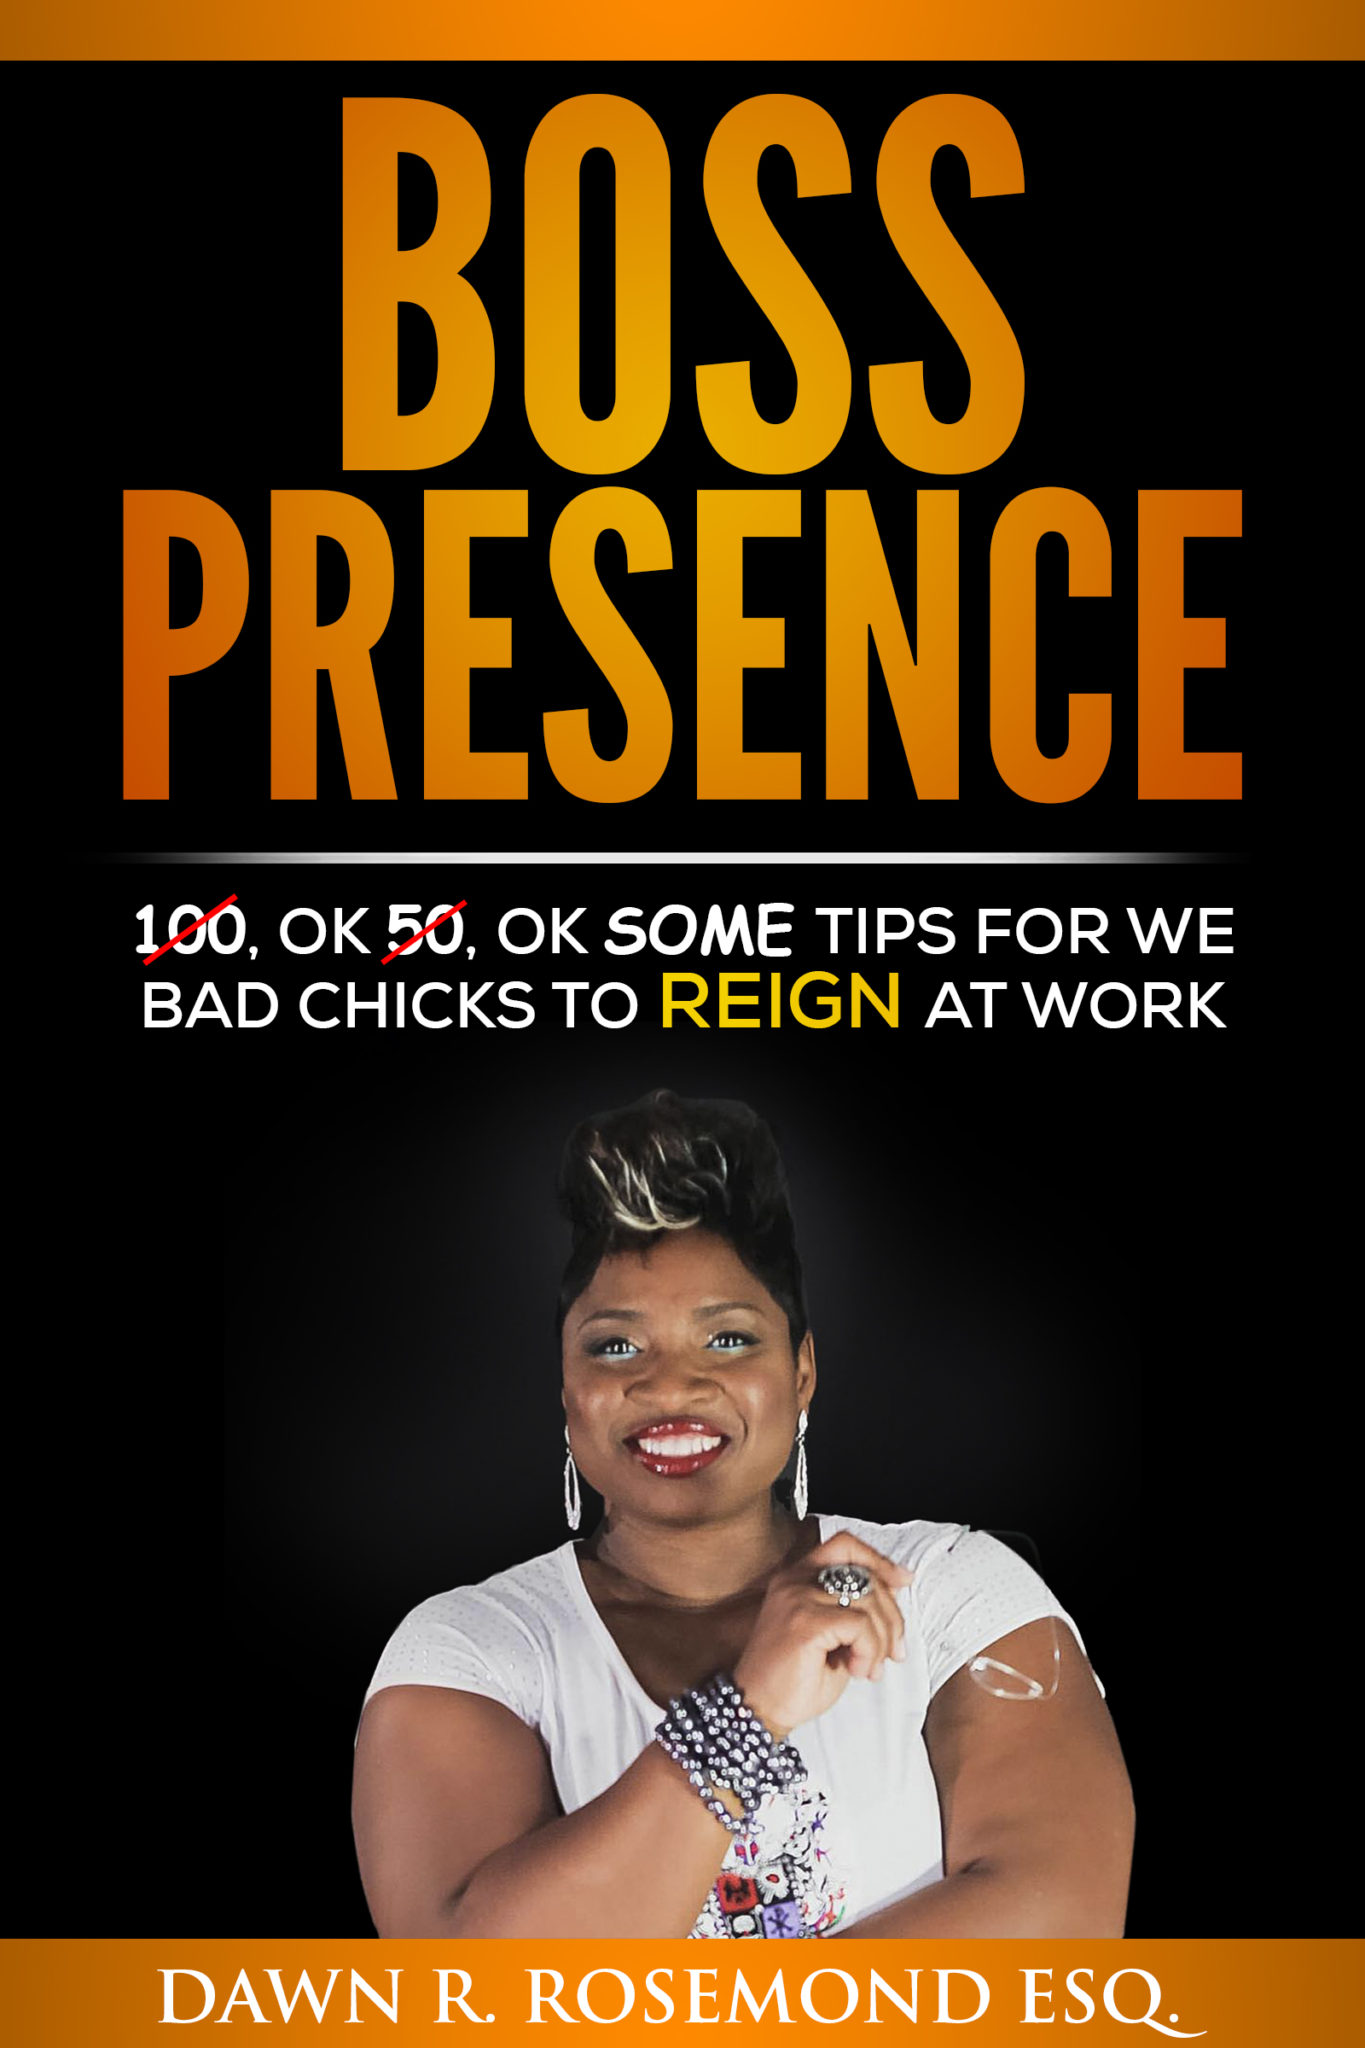 FREE: Boss Presence: 100, Ok 50, Ok Some Tips for We Bad Chicks to REIGN at Work by Dawn R. Rosemond Esq.